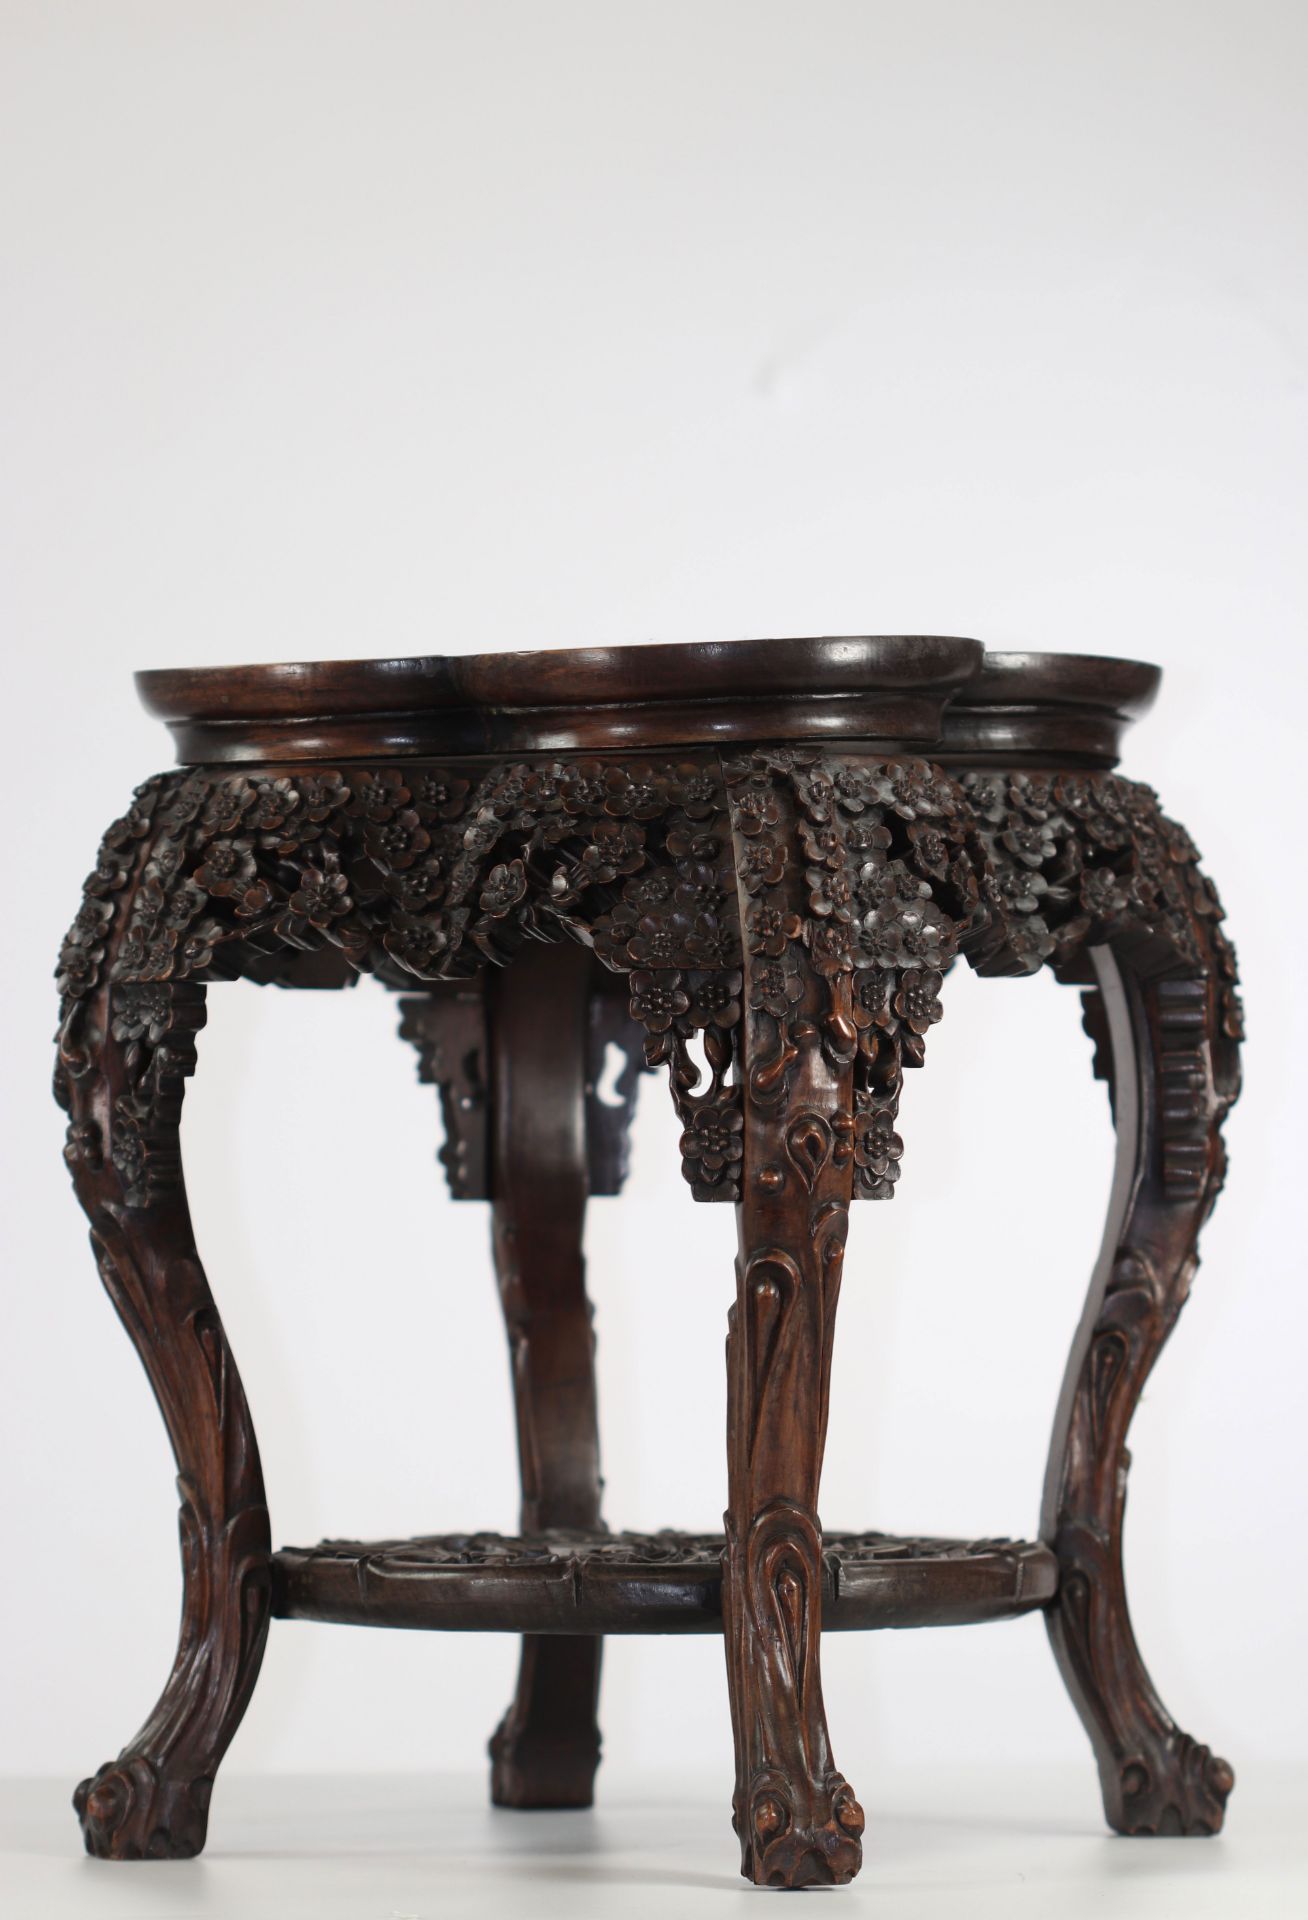 Ironwood stand with mother-of-pearl inlays, for the Peranakan Straits Nyonya market, China, 19th cen